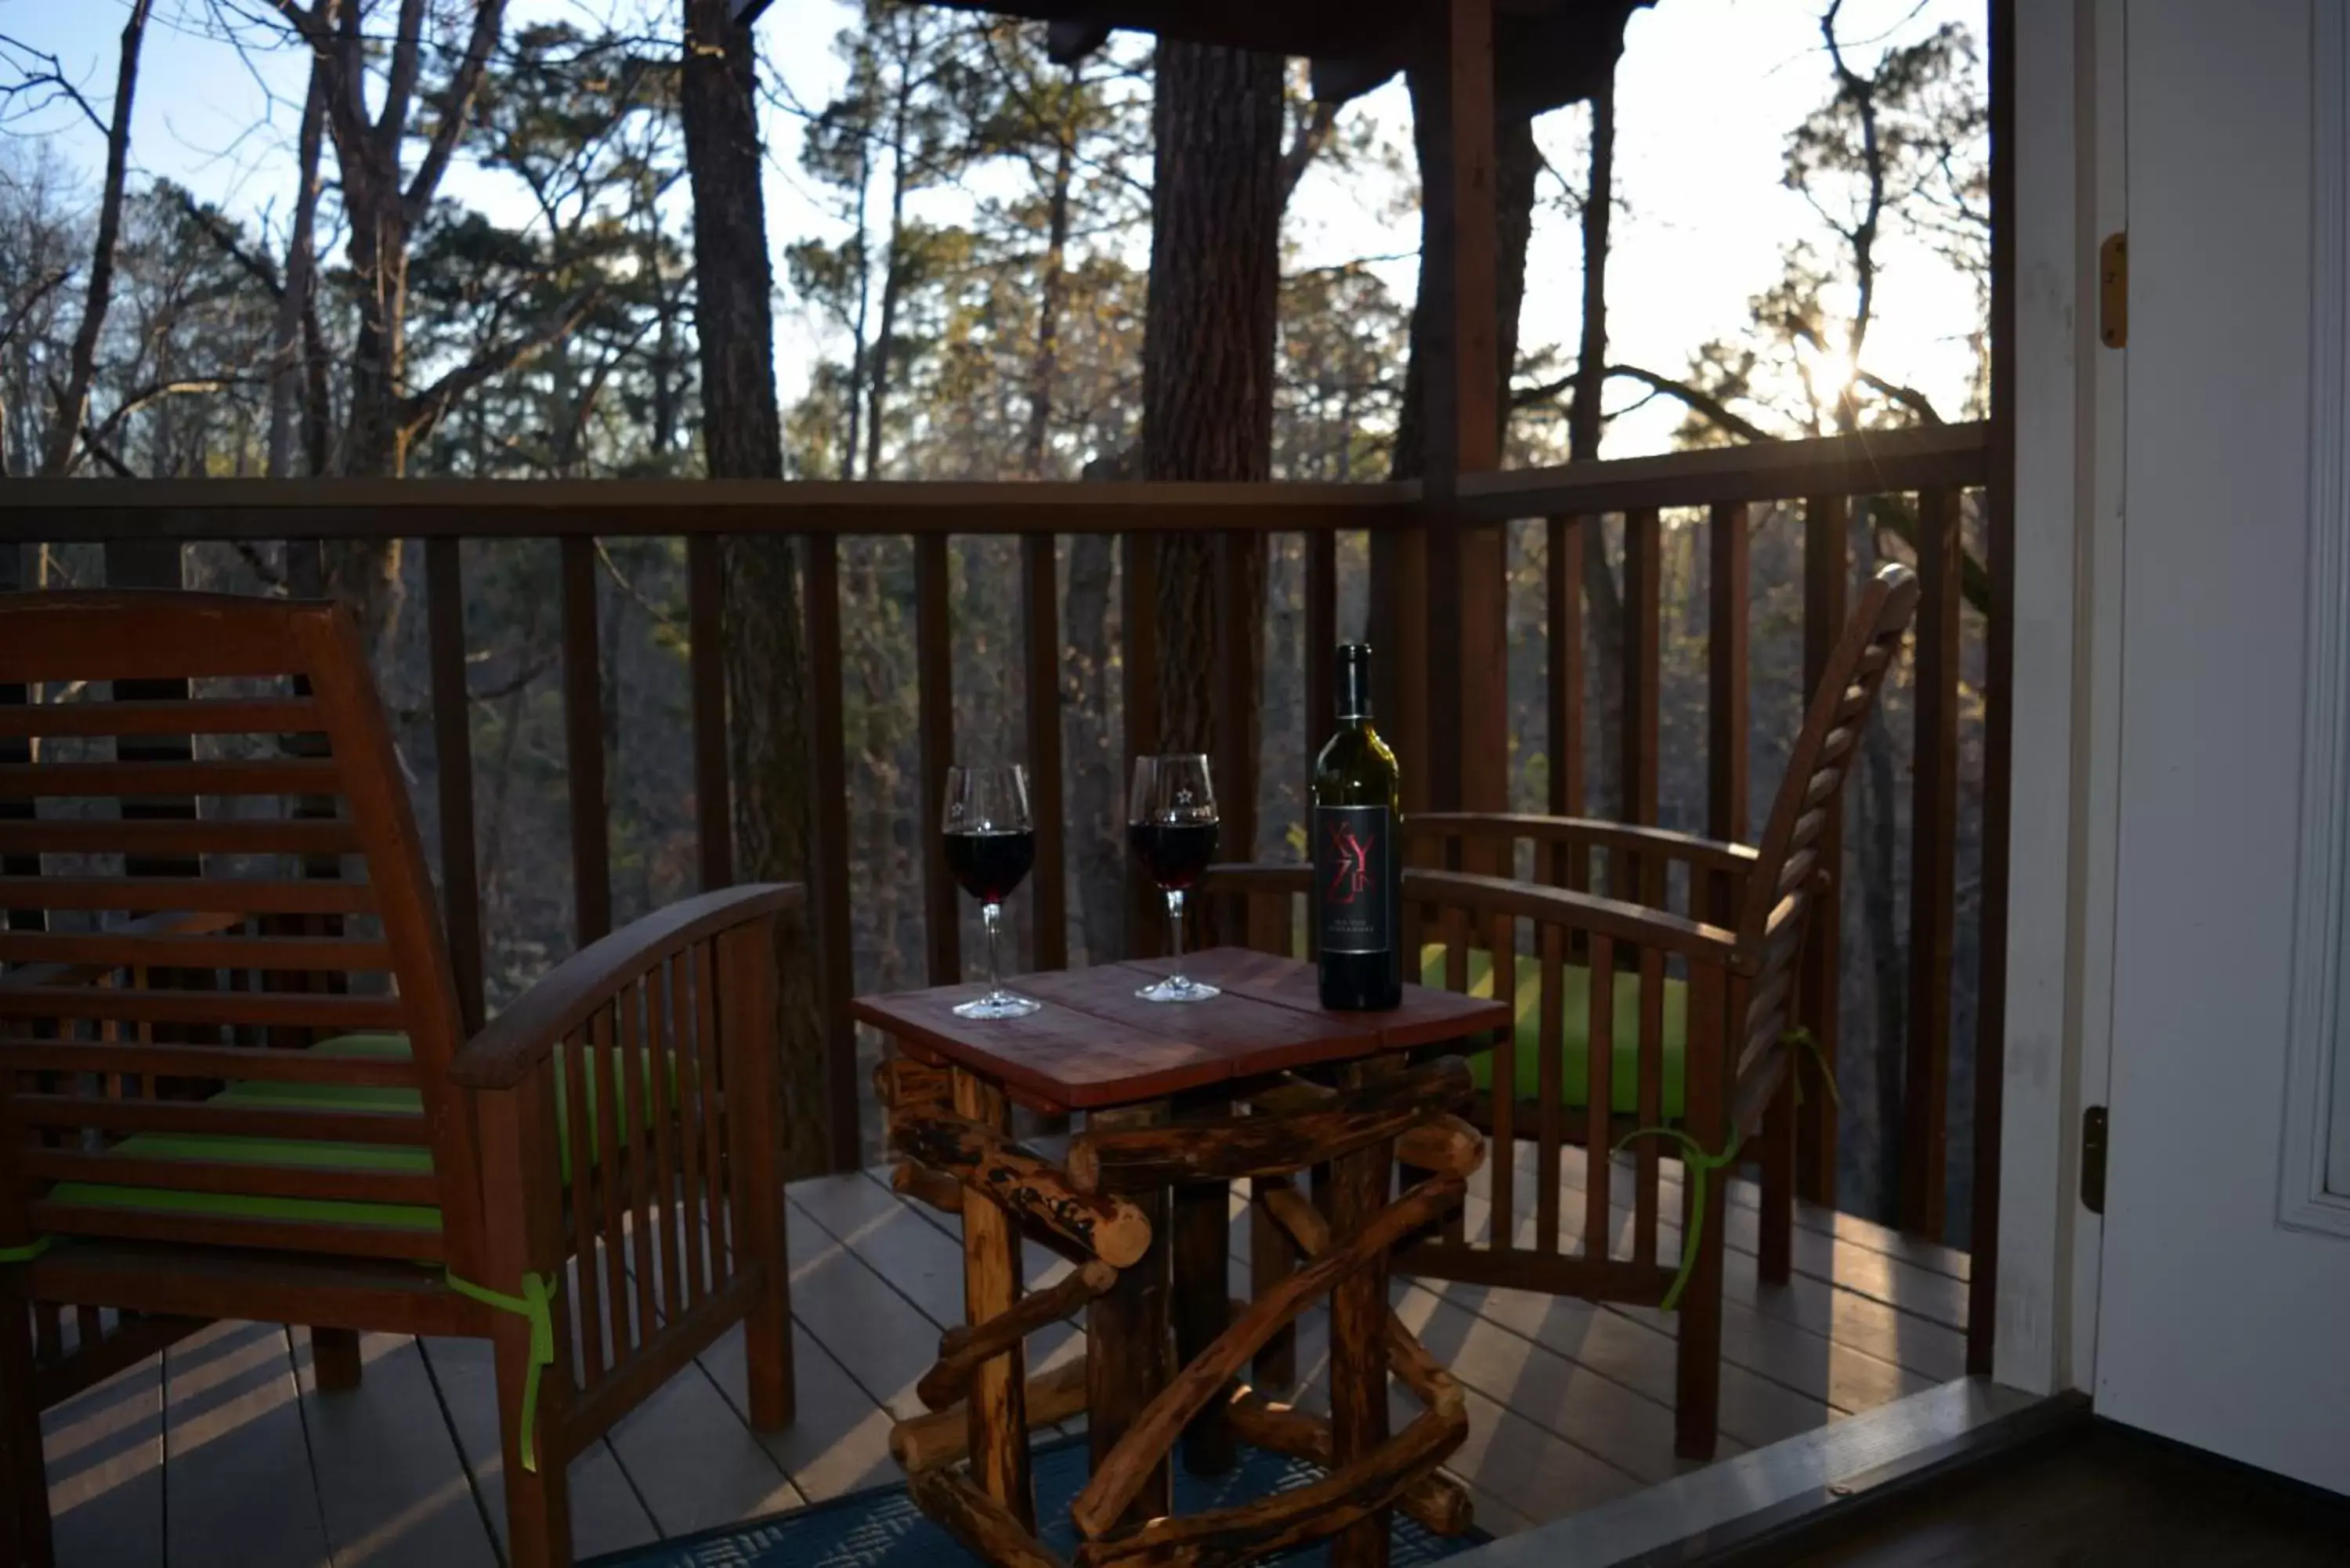 Patio in The Woods Cabins